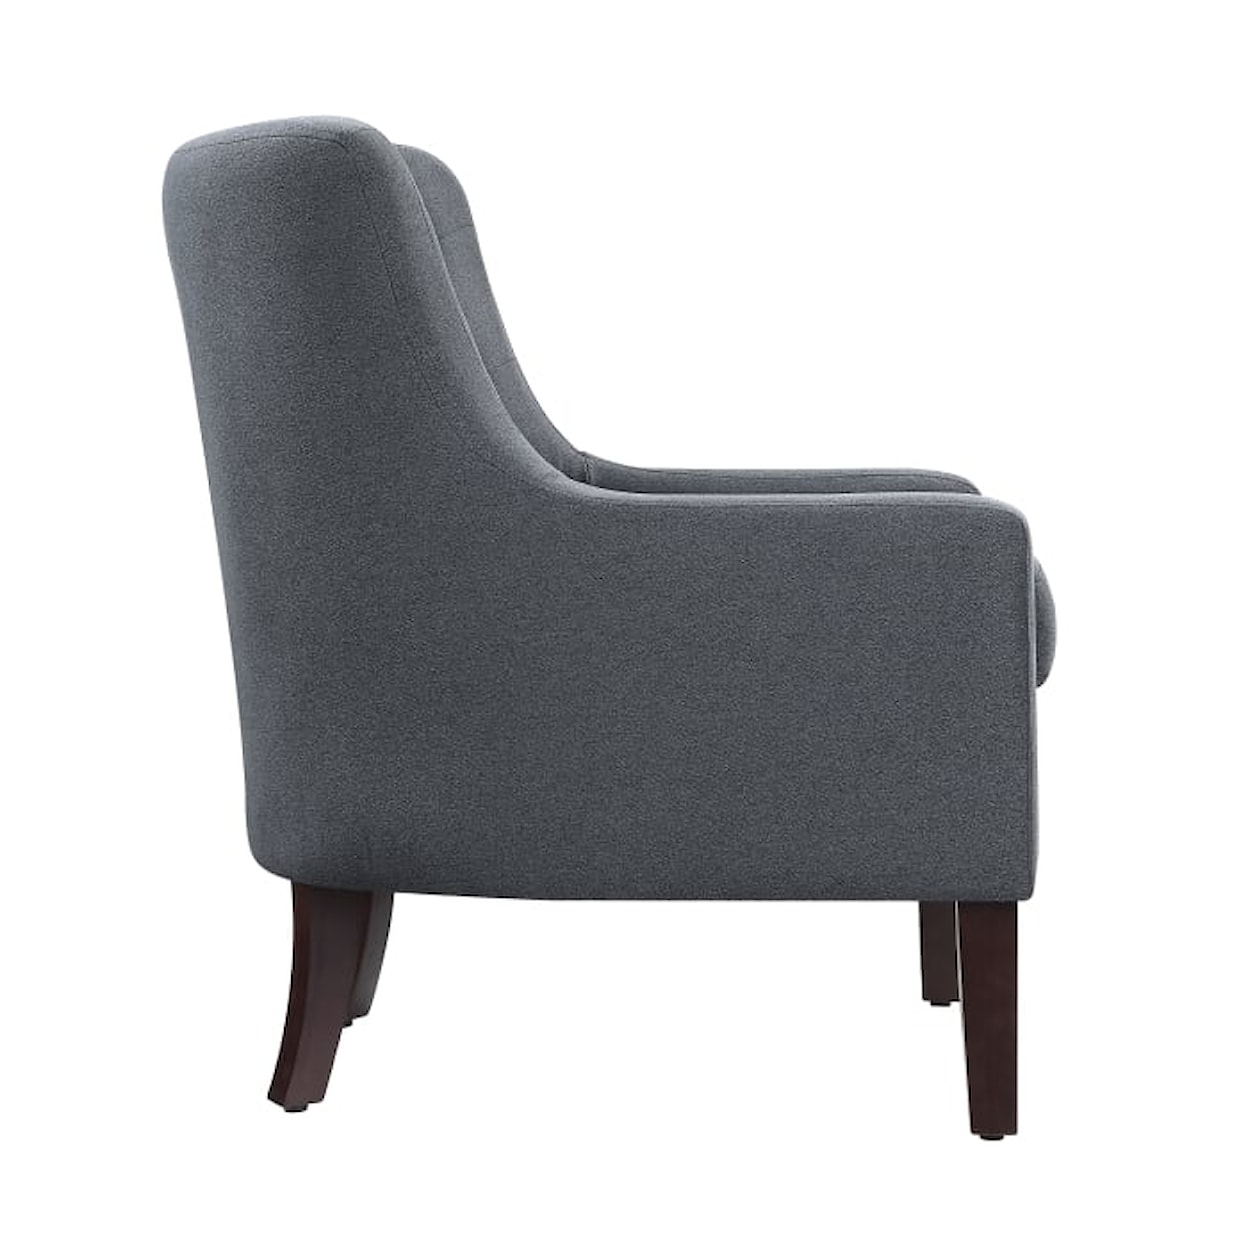 Homelegance Furniture Cairn Accent Chair